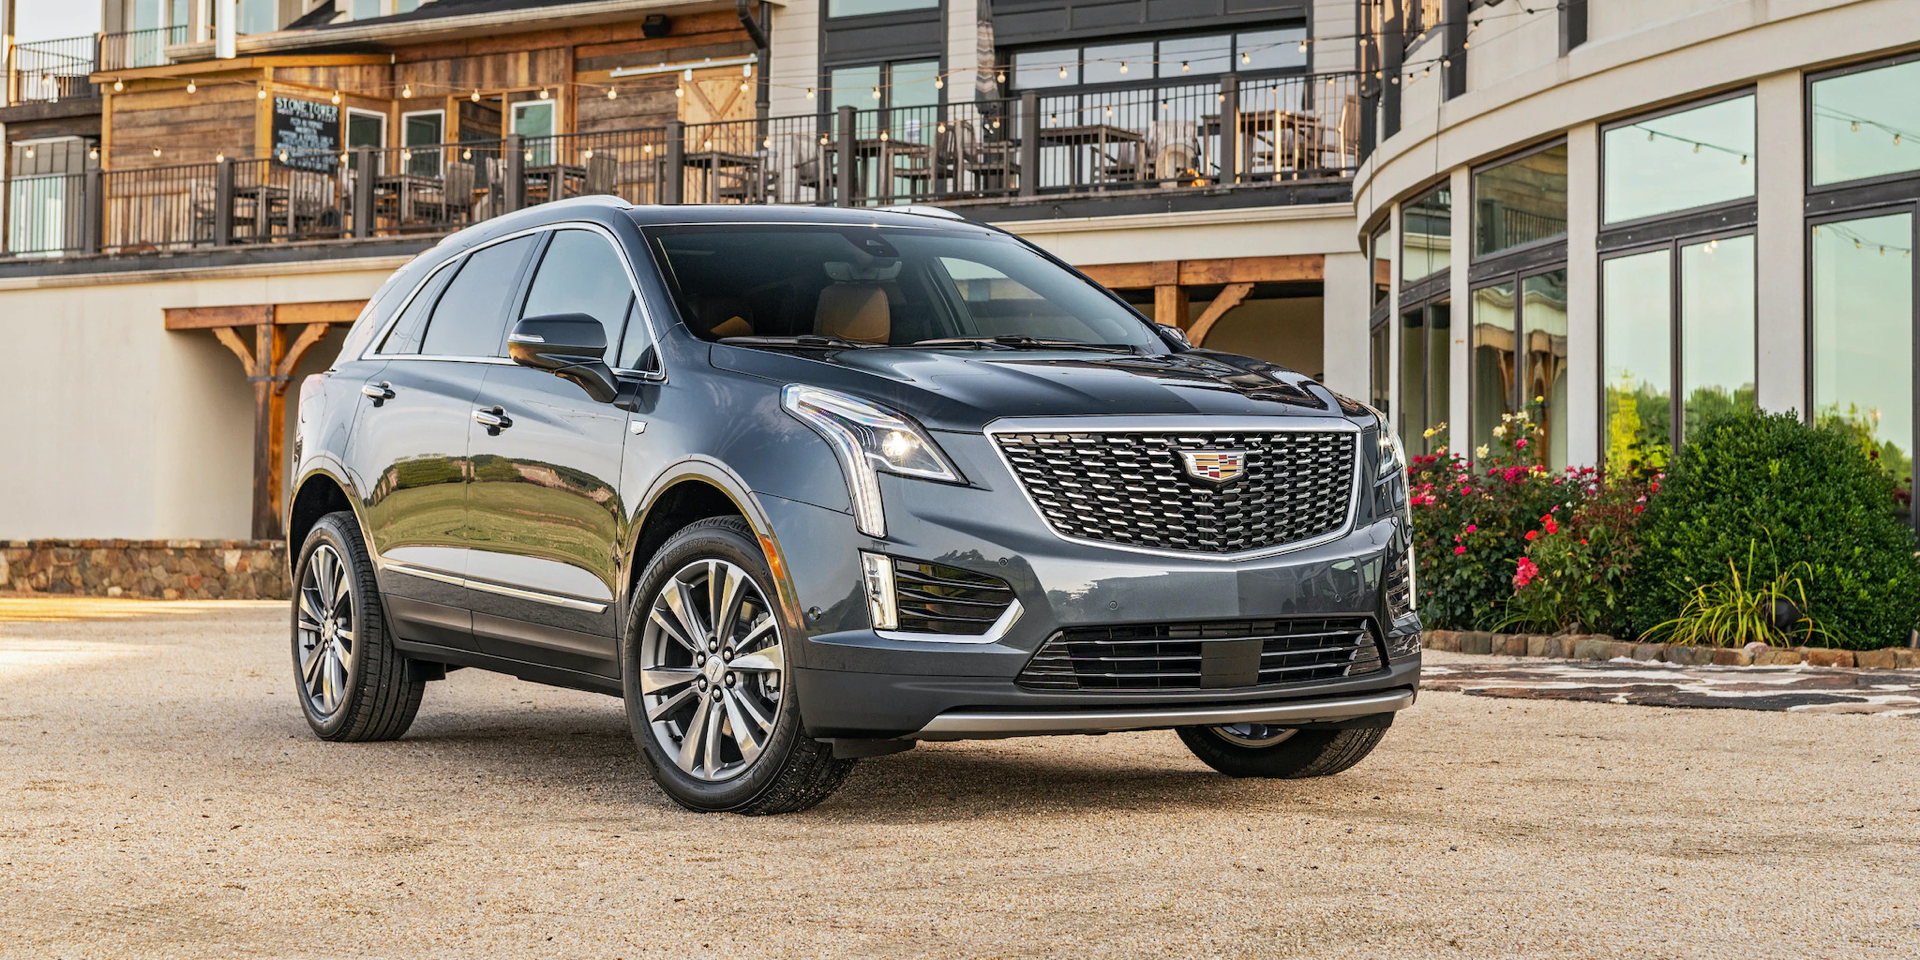 2020 Cadillac XT5 parked on gravel driveway